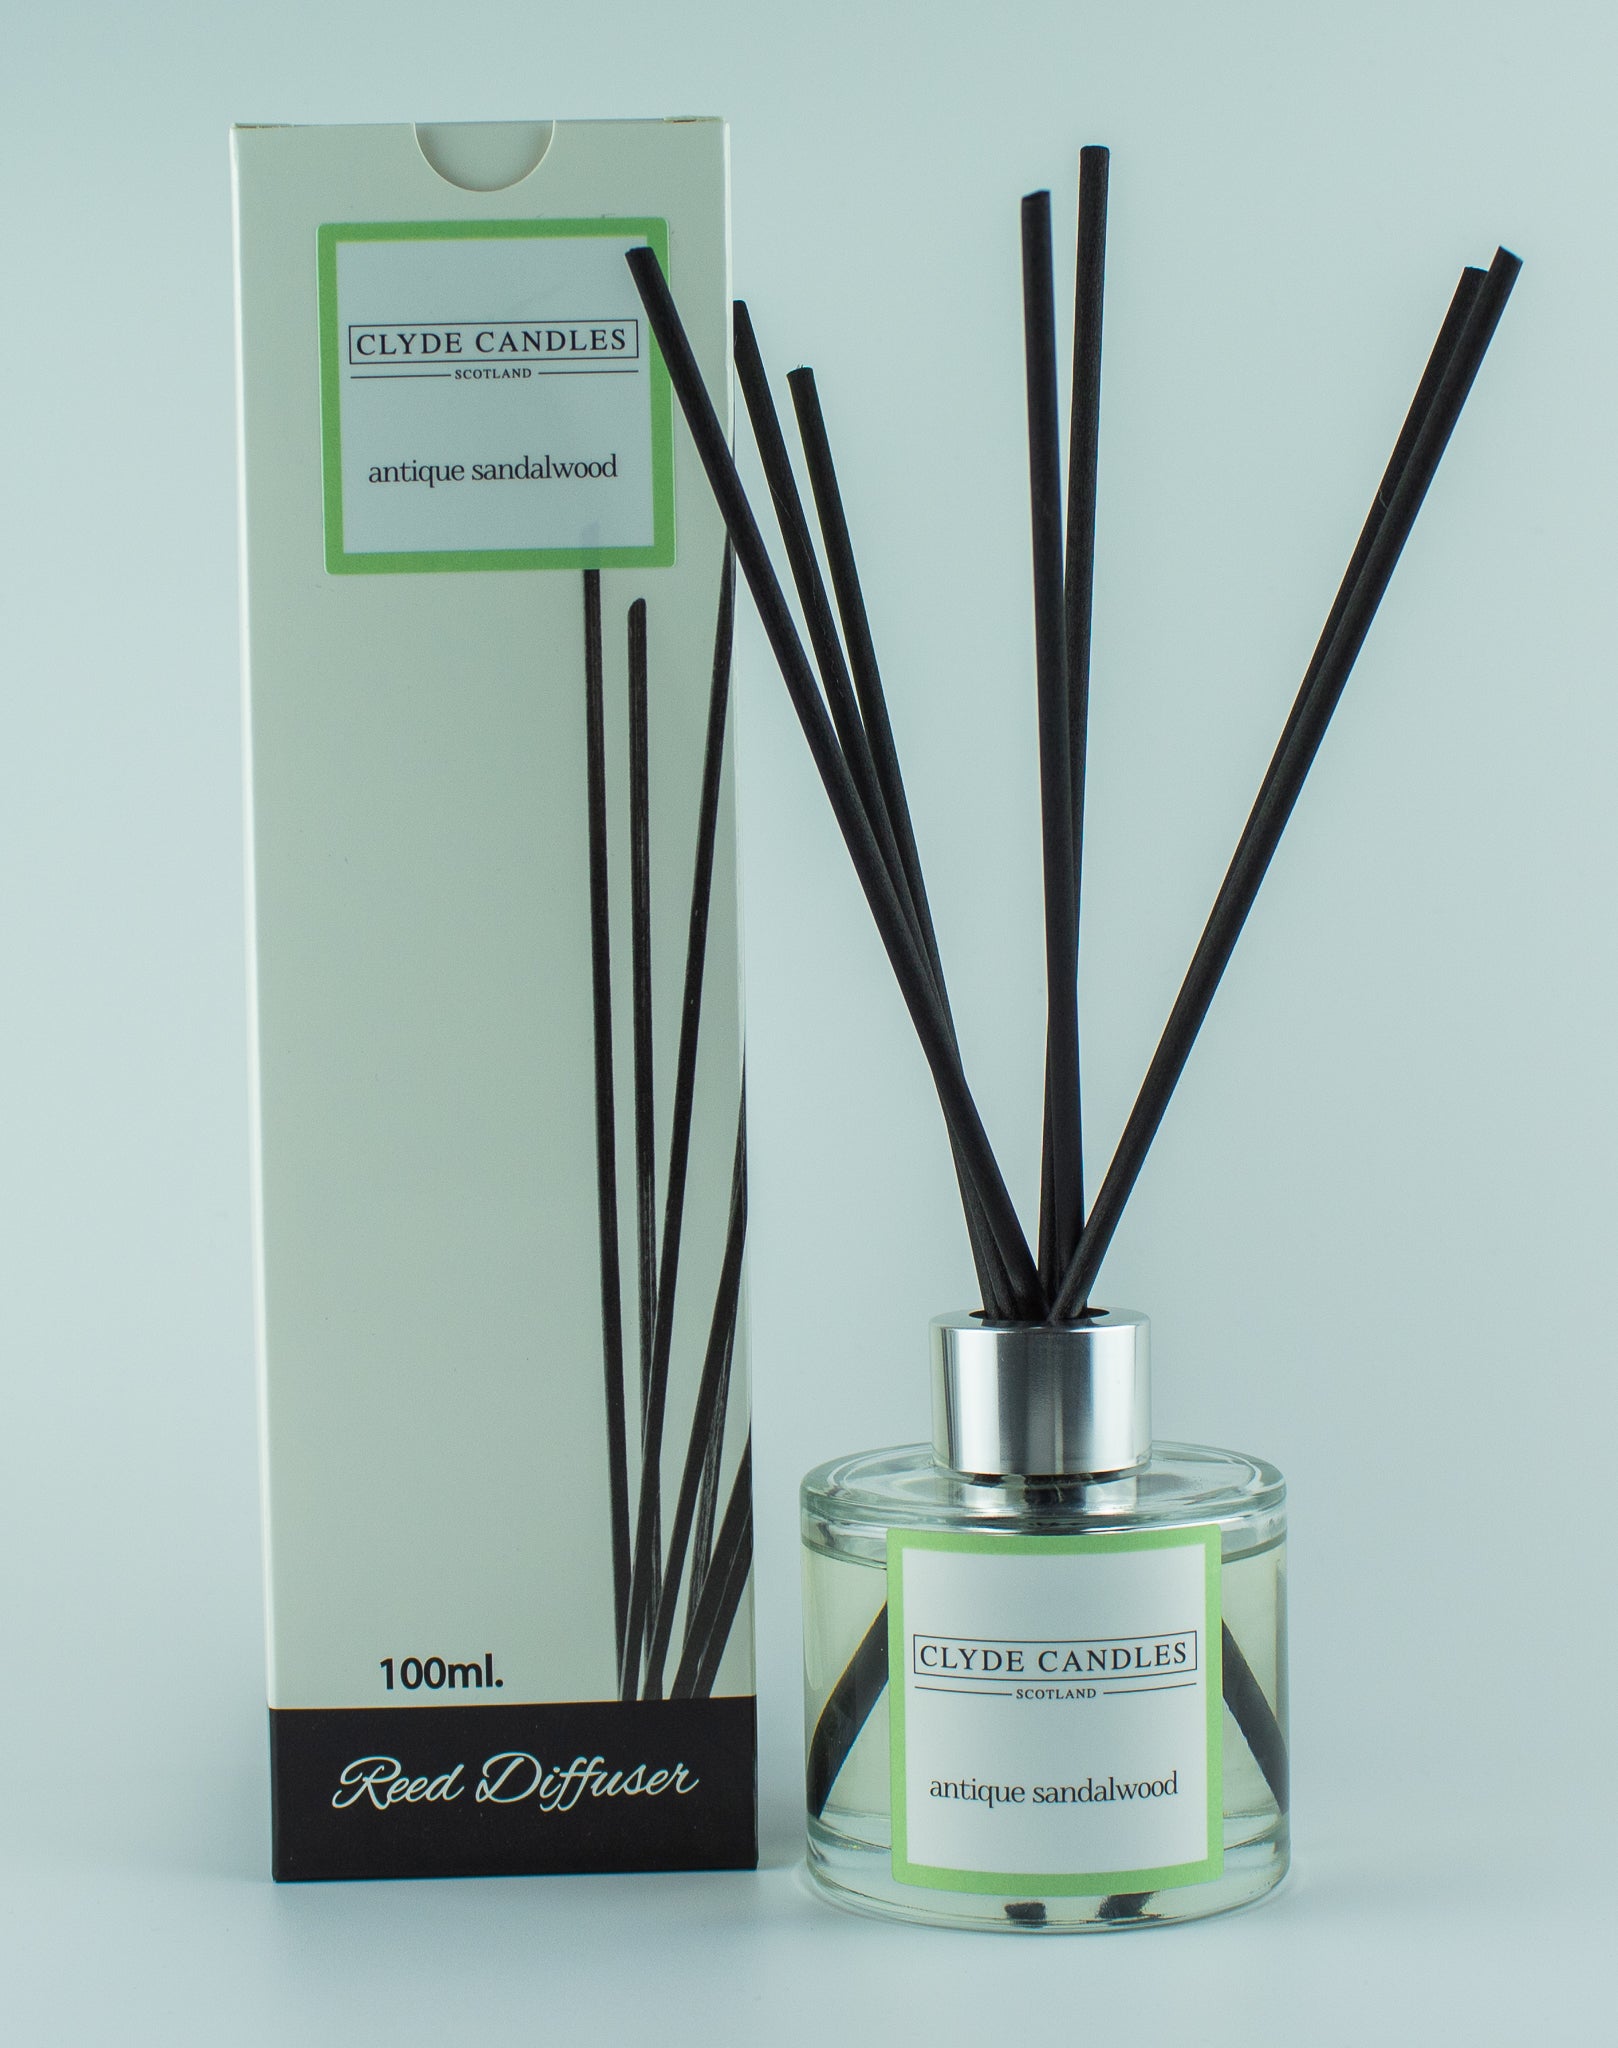 Antique Sandalwood Reed Diffuser - Clyde Candles, Luxury Diffuser Oil with a Set of 7 Fibre Sticks, 100ml, Best Aroma Scent for Home, Kitchen, Living Room, Bathroom. Fragrance Diffusers set with sticks, office gifts, masculine scents